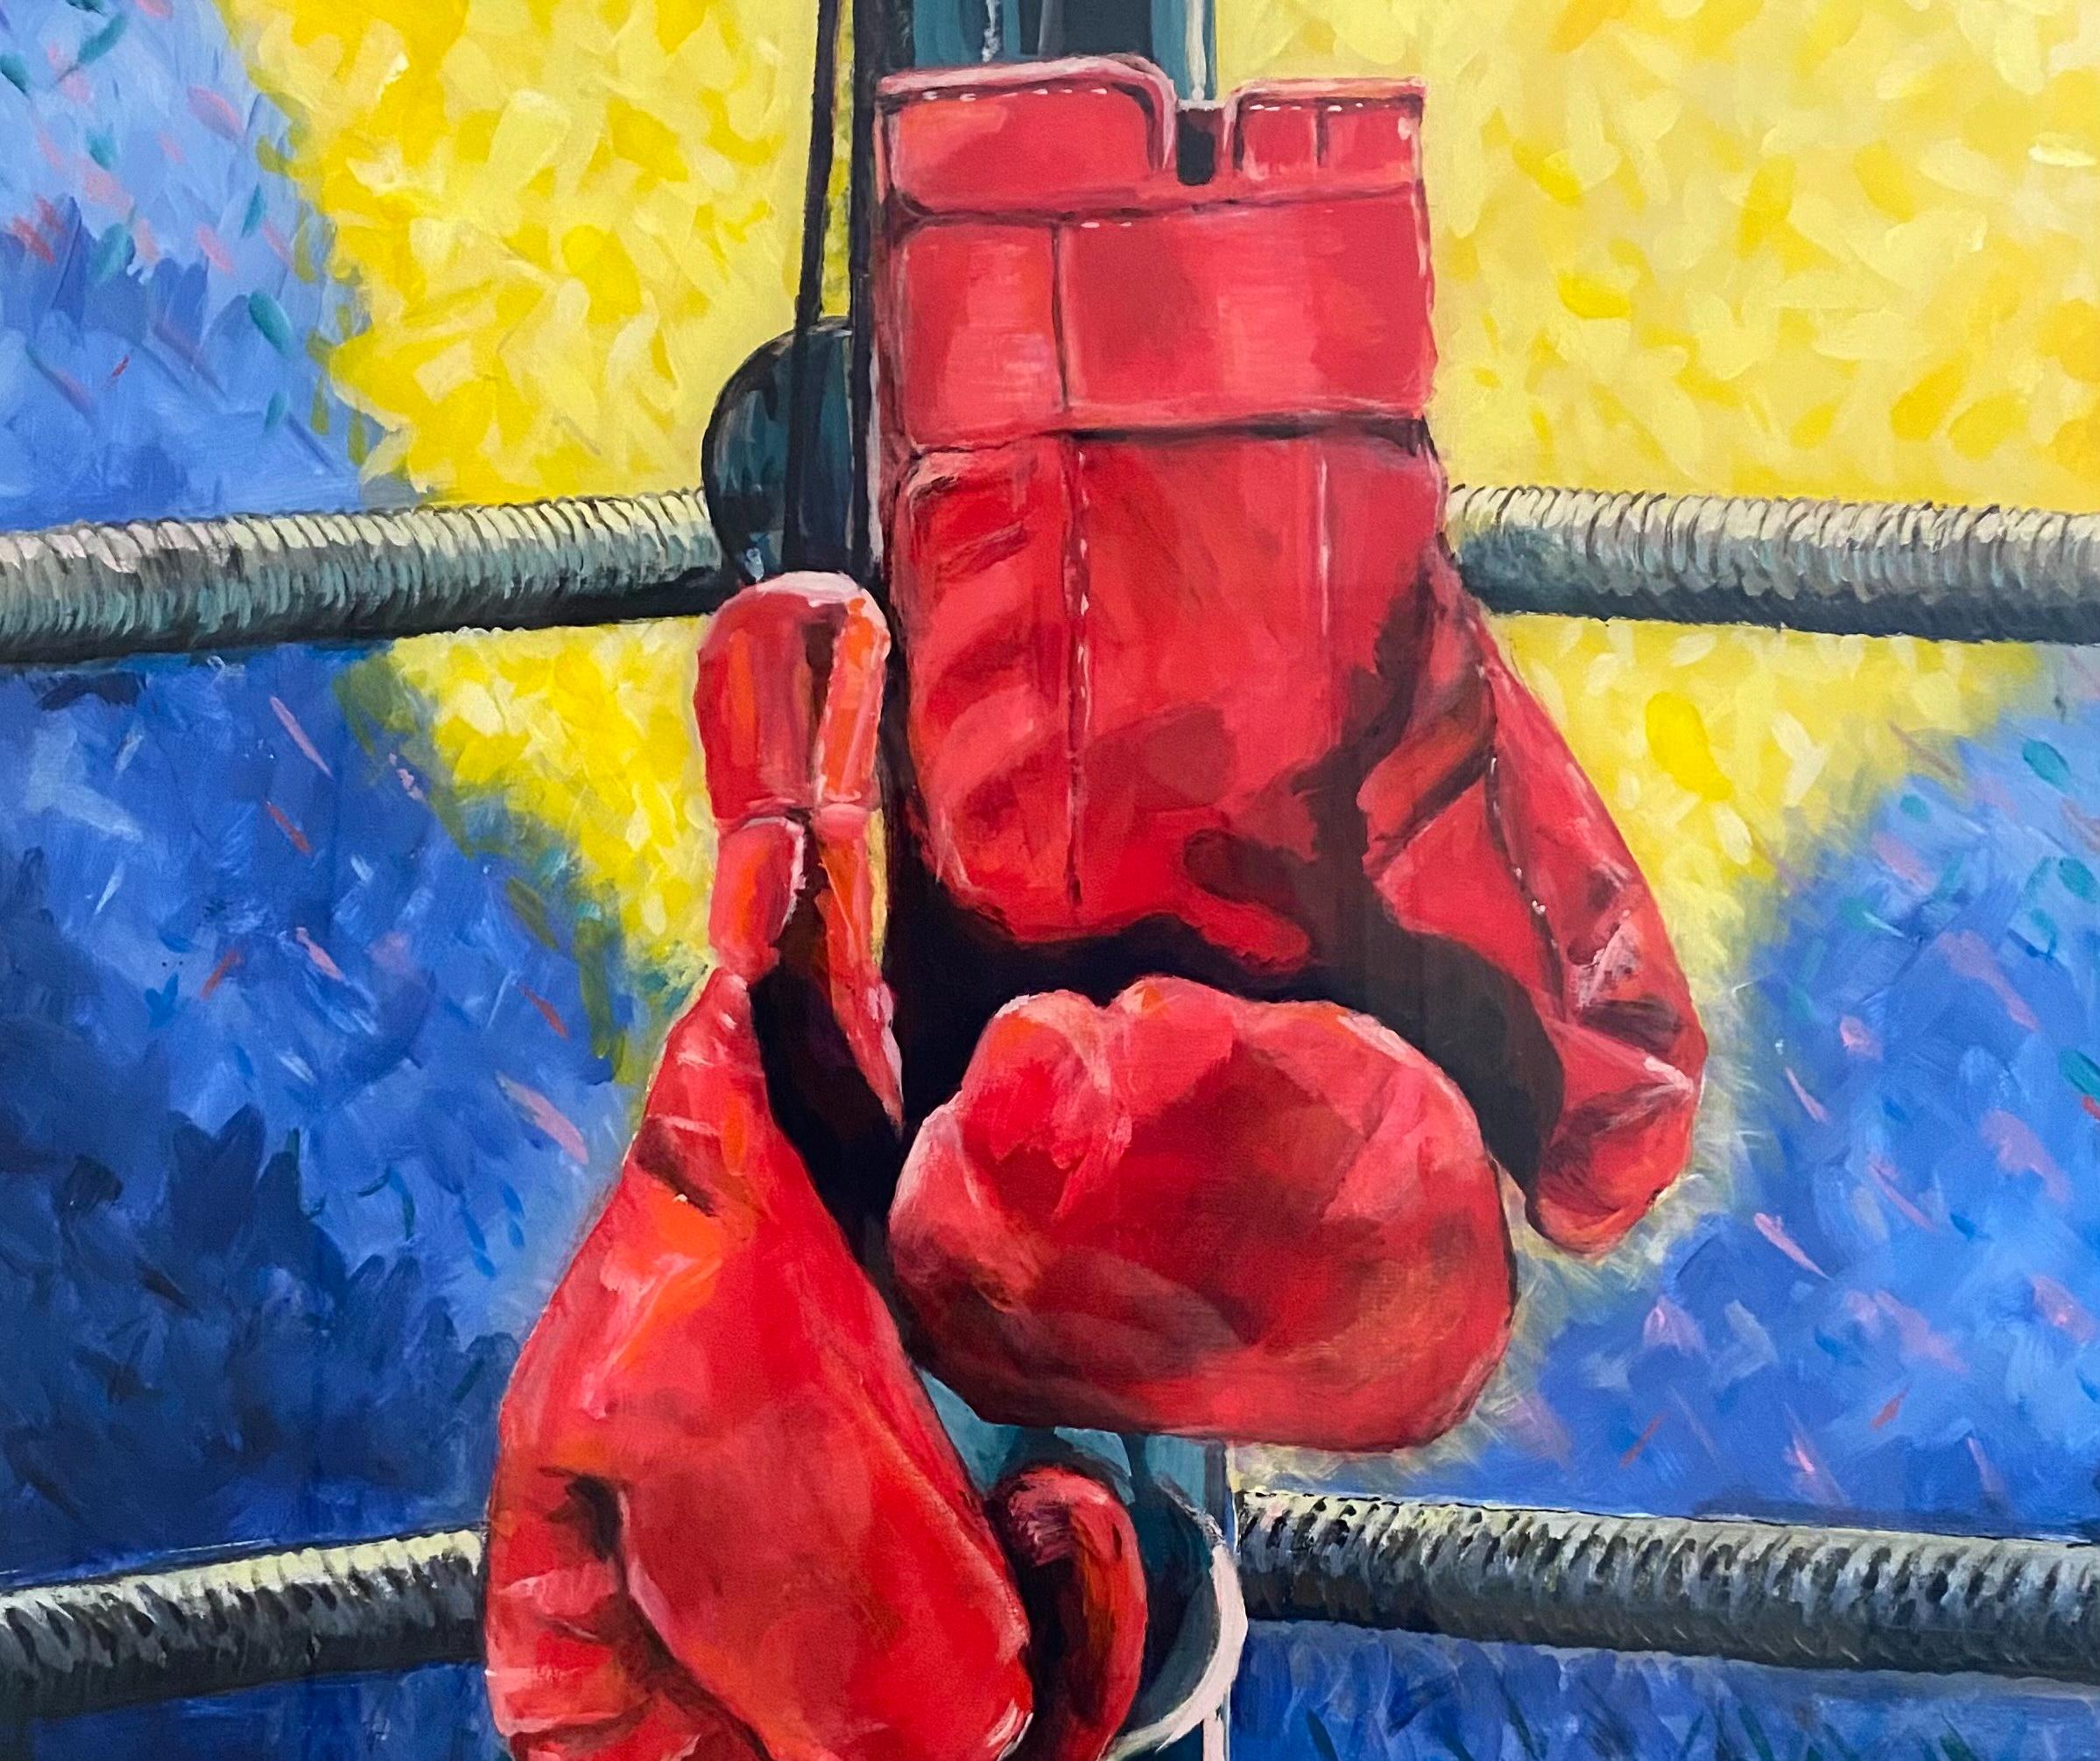  Another Win, Realism, Acrylic w/Resin Gallery Wrap, Boxing Gloves, Ringside - Realist Painting by June Arthur